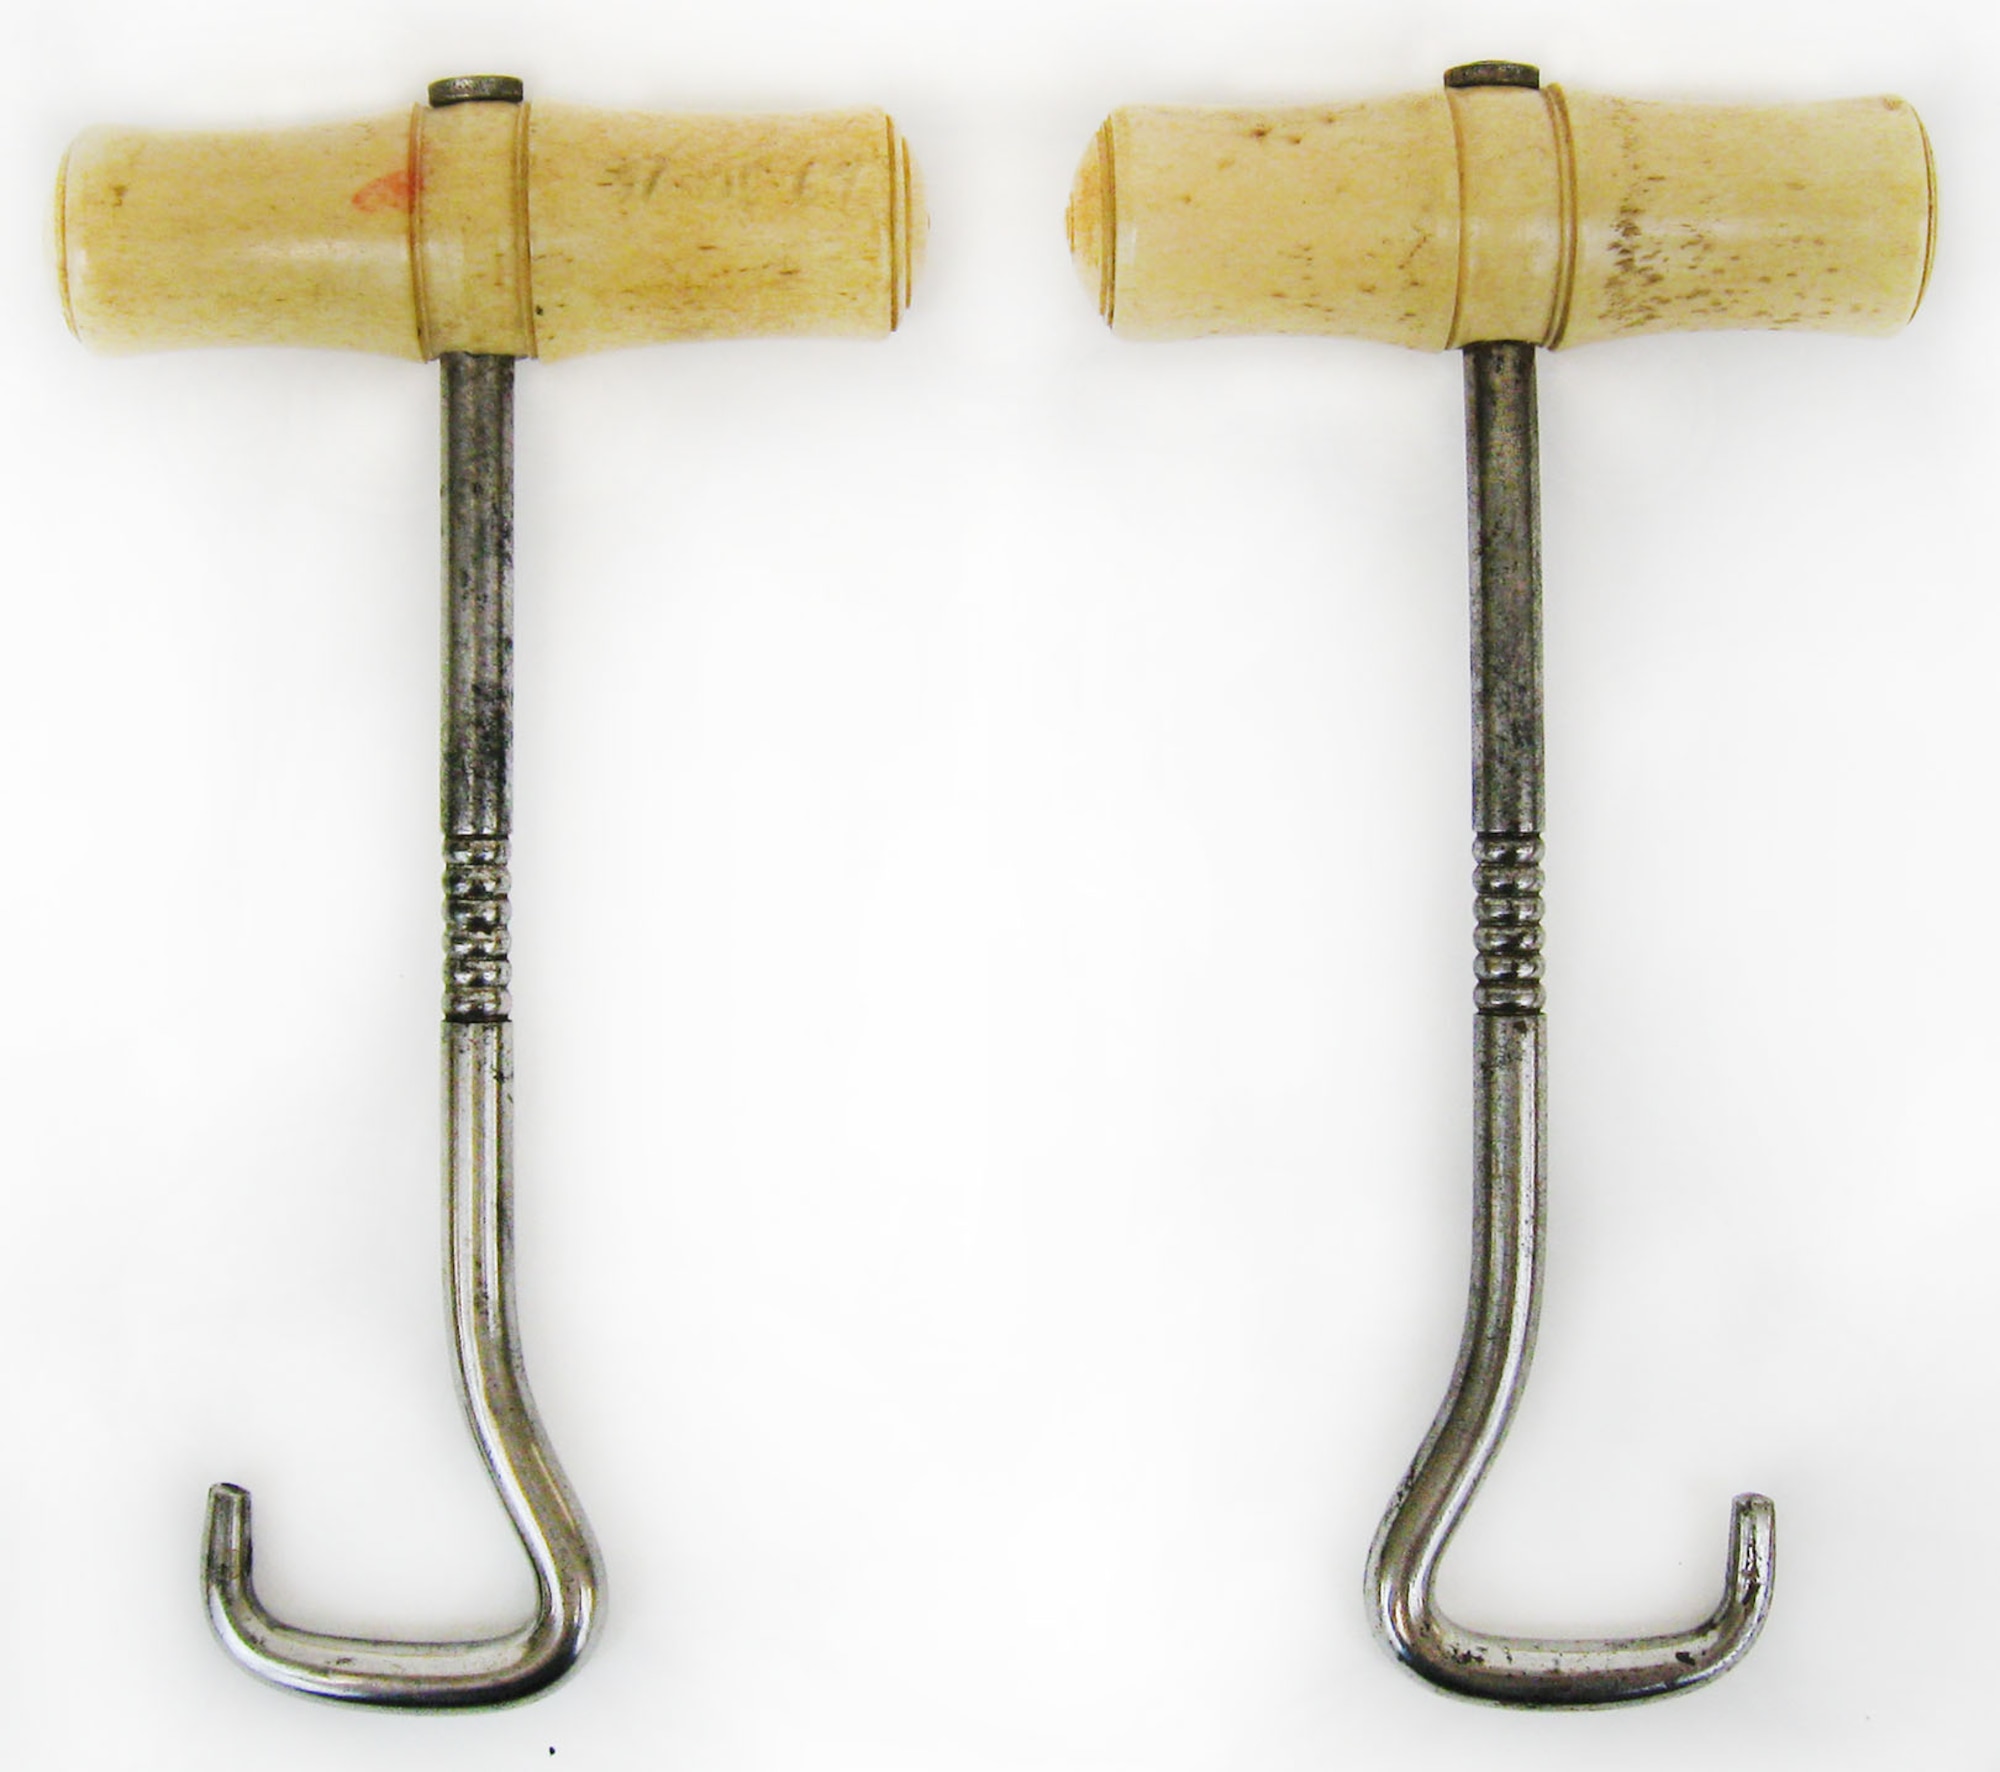 Make pulling on boots and ease with this pair of boot hooks at the best  discount prices, wide handle for added grip and comfort.